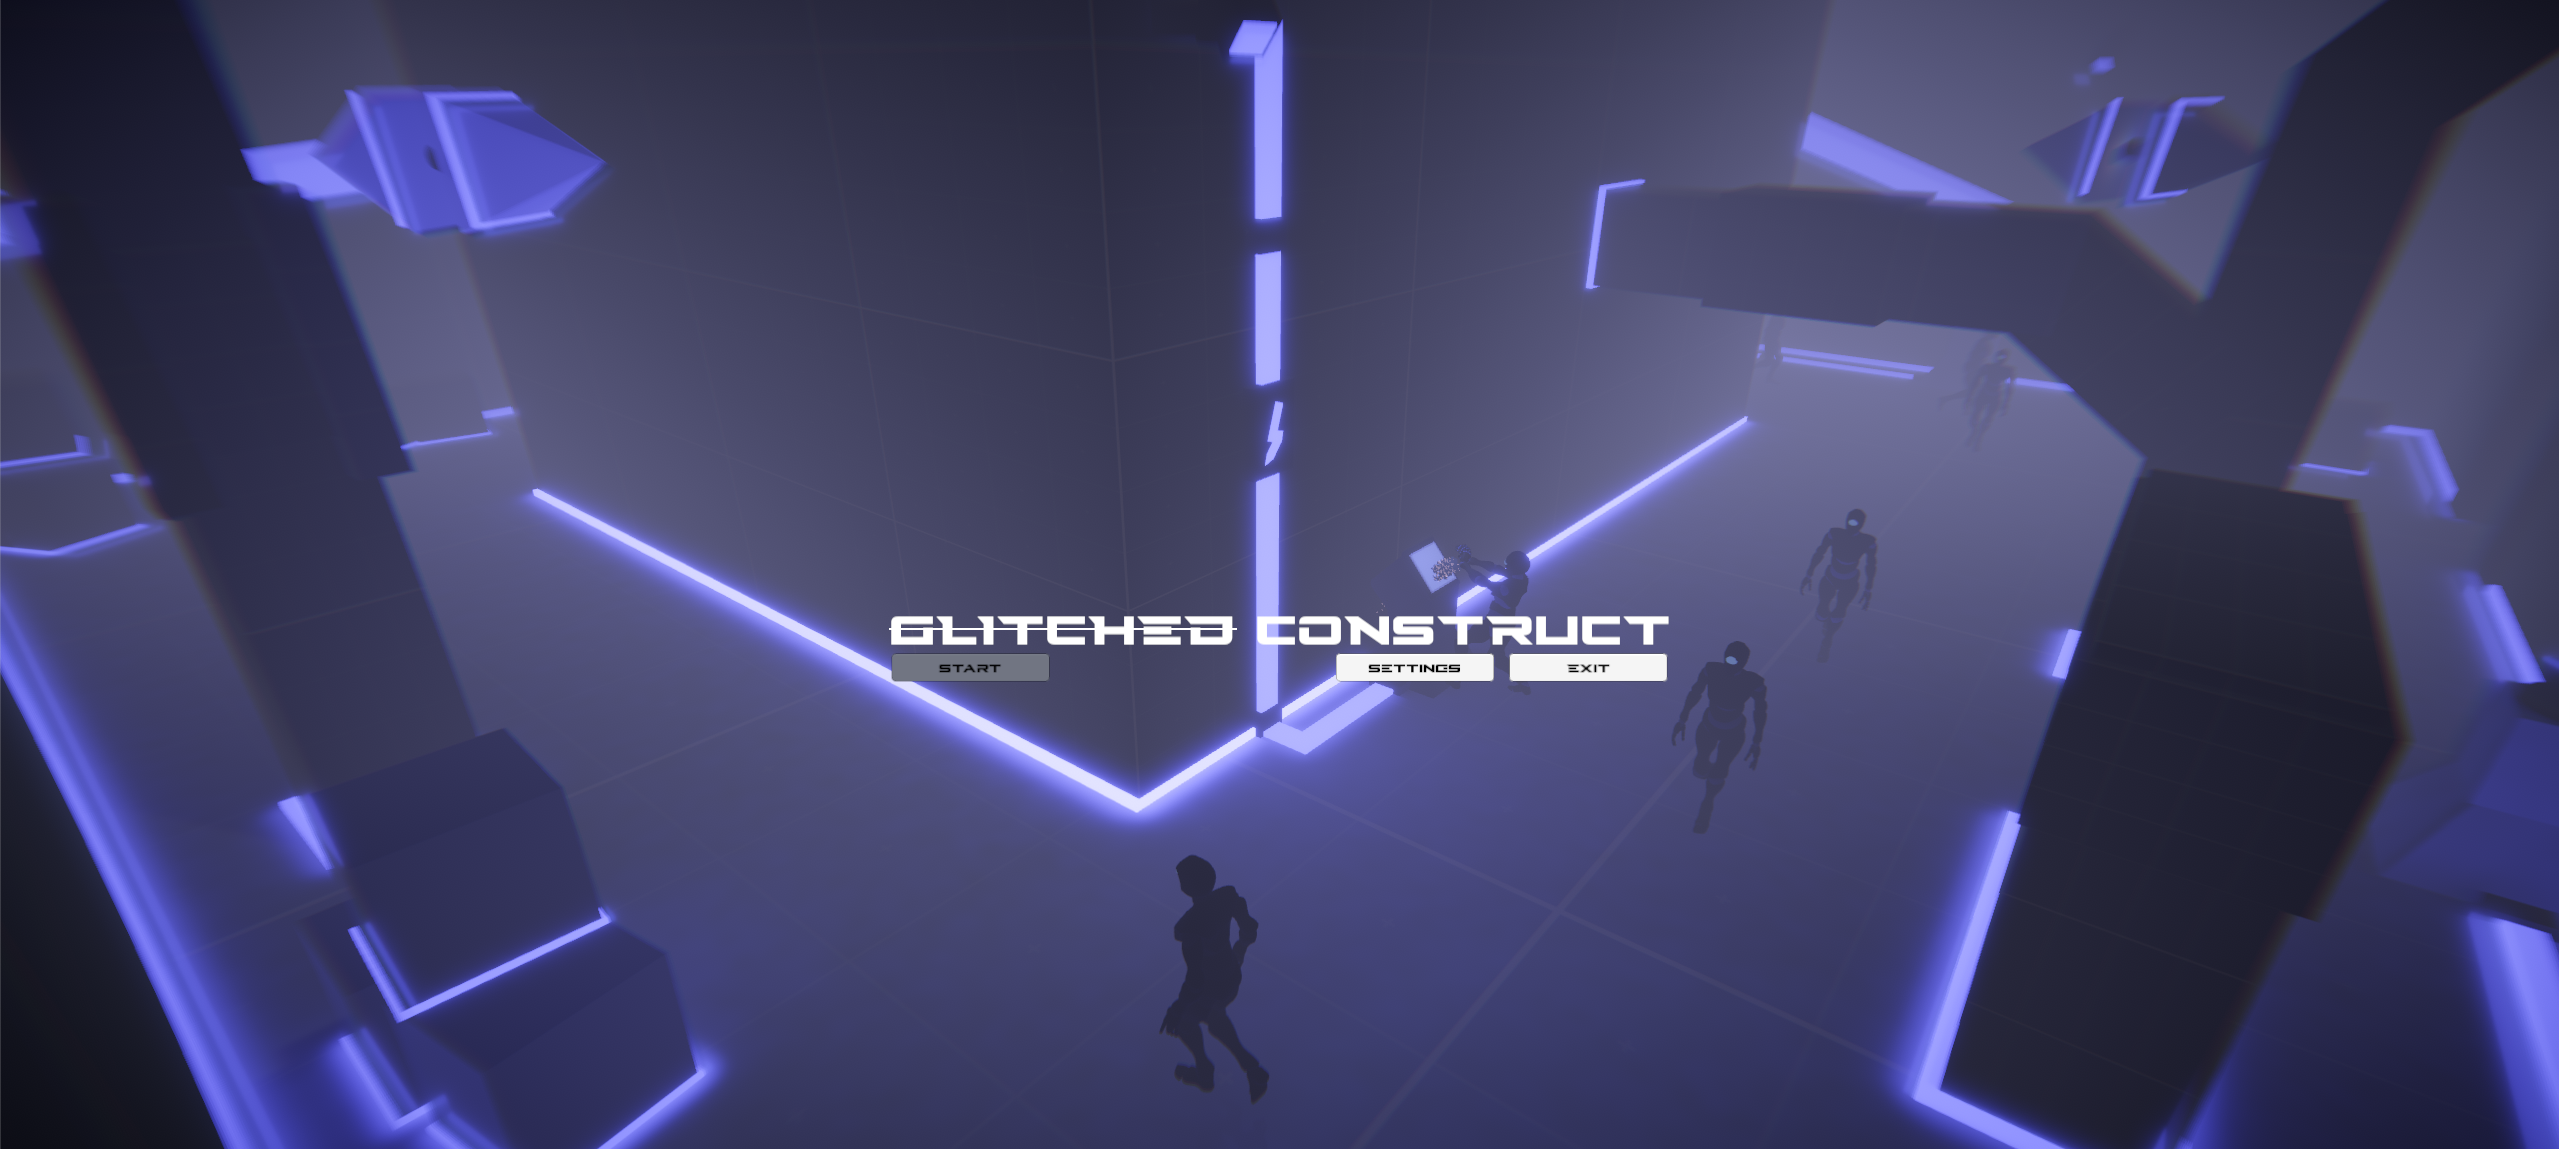 Glitched Construct